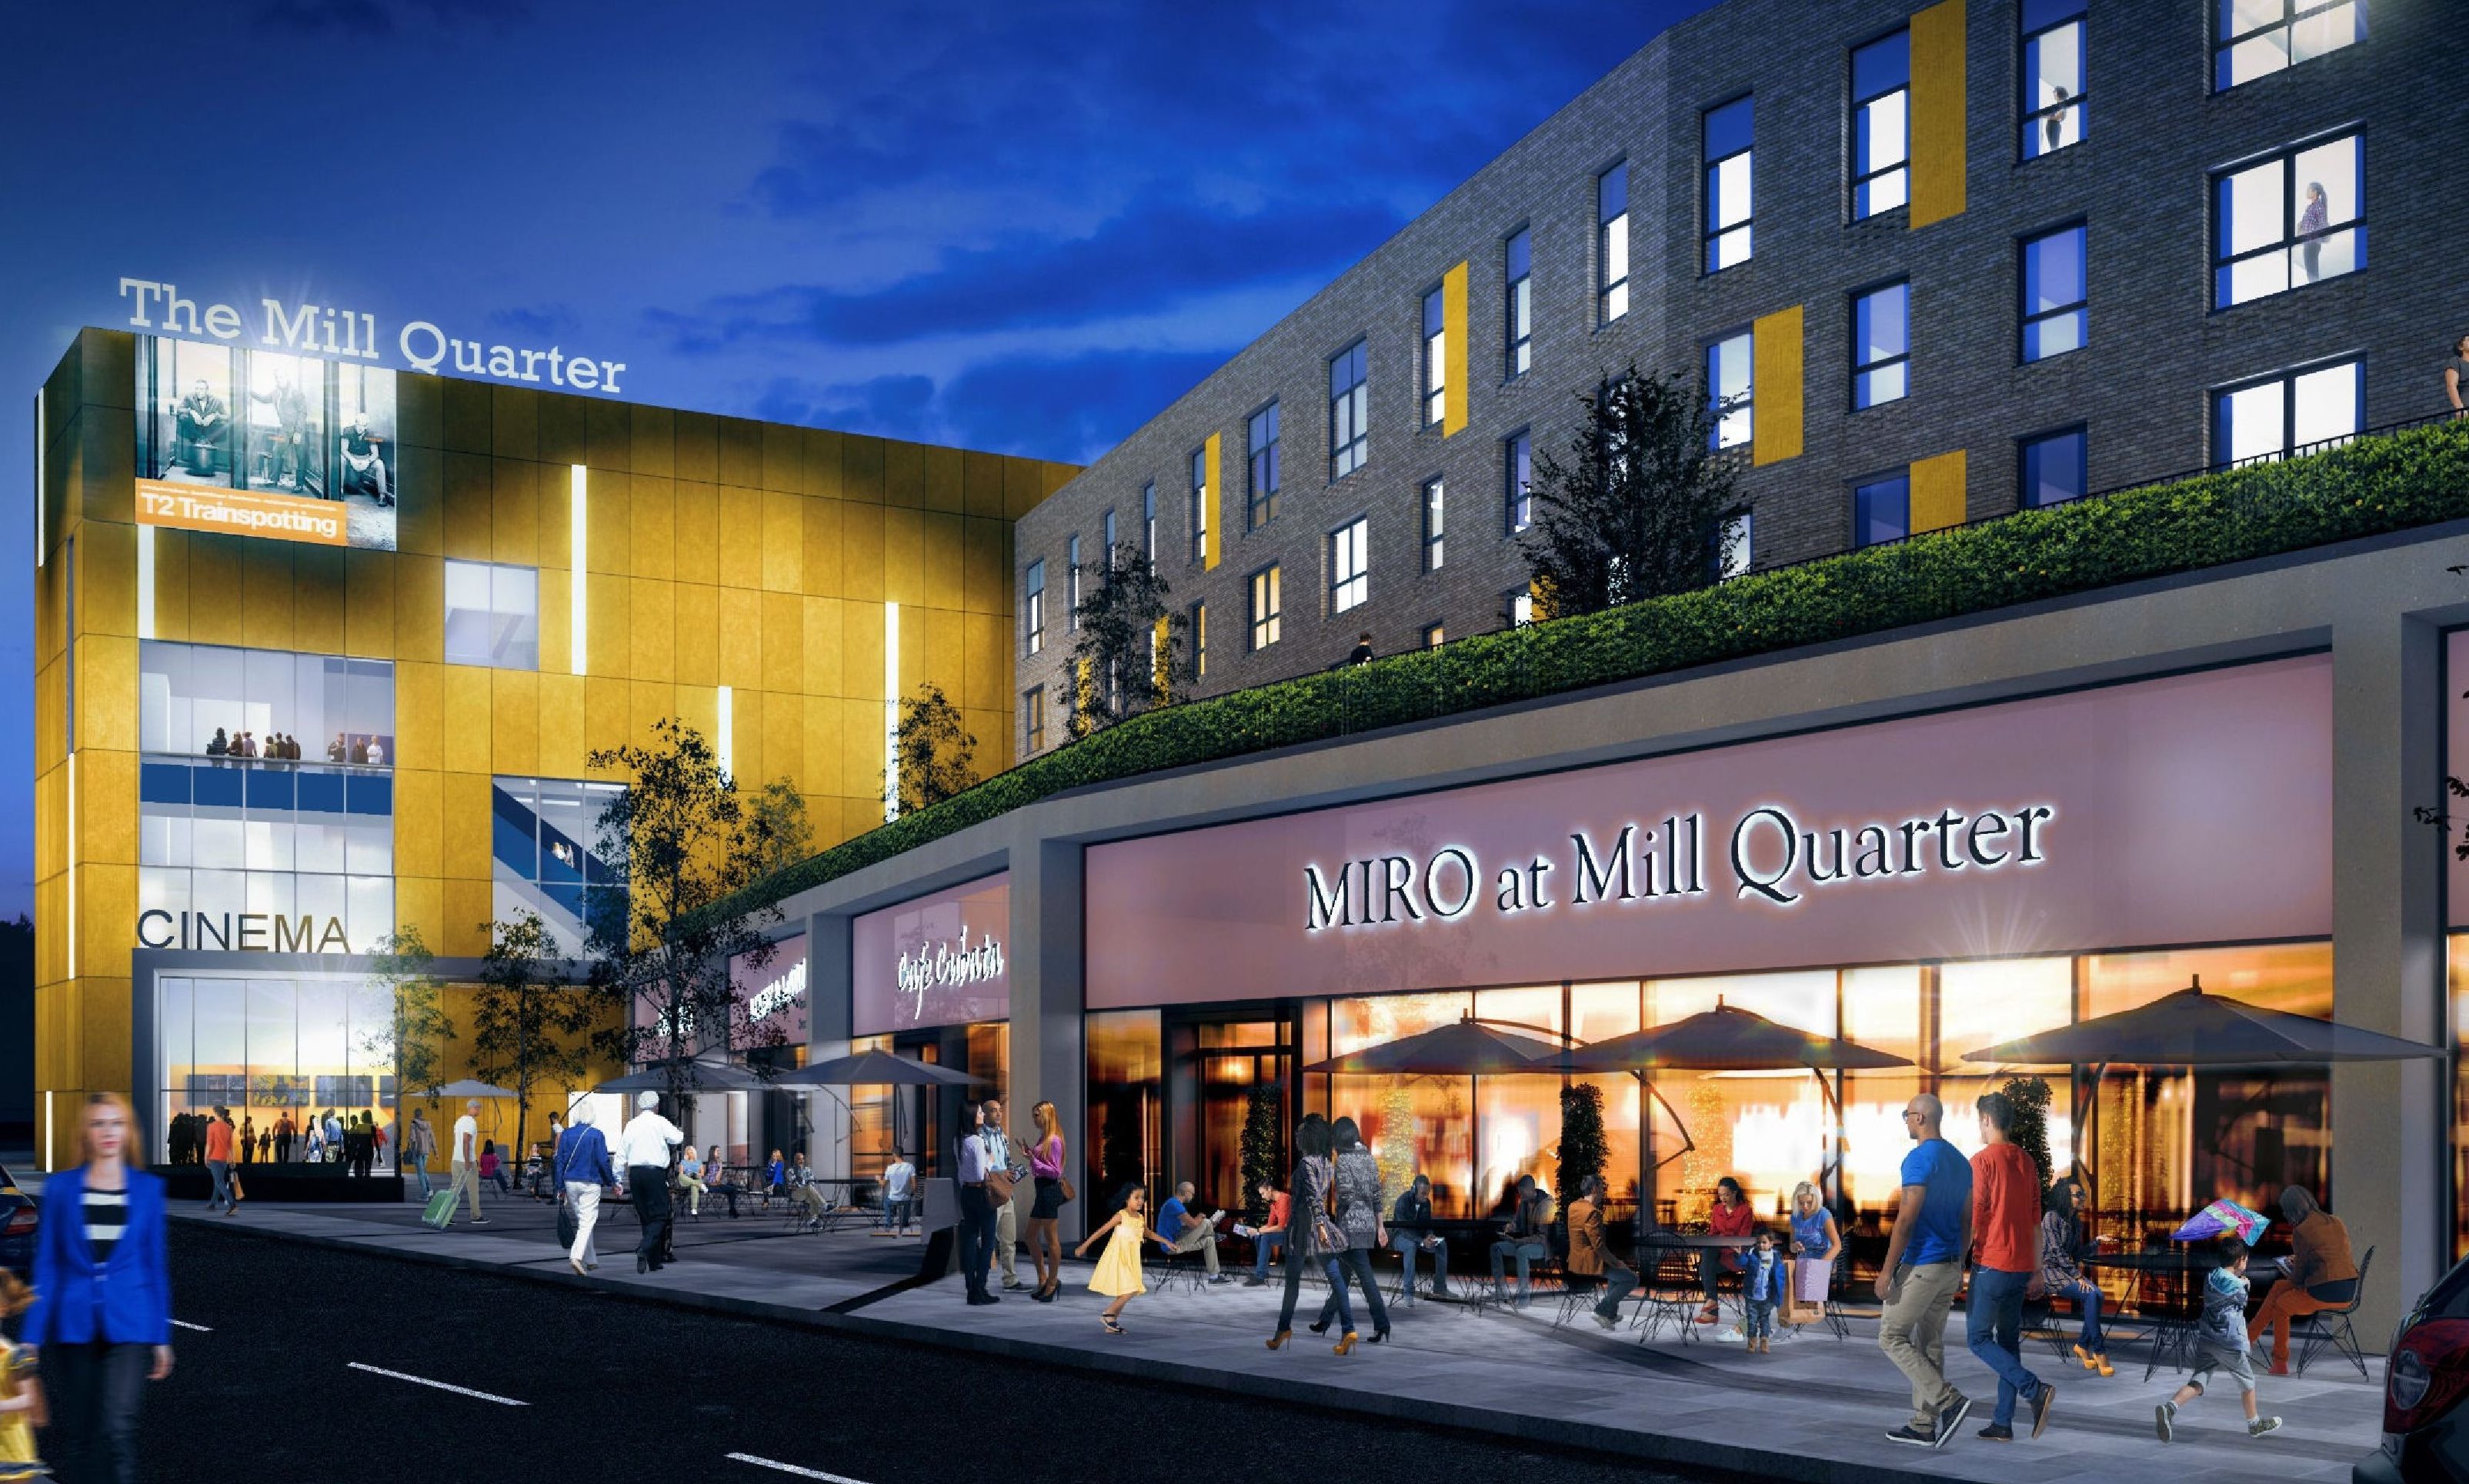 An artists impression of how the new Mill Quarter cinema and retail complex could look.